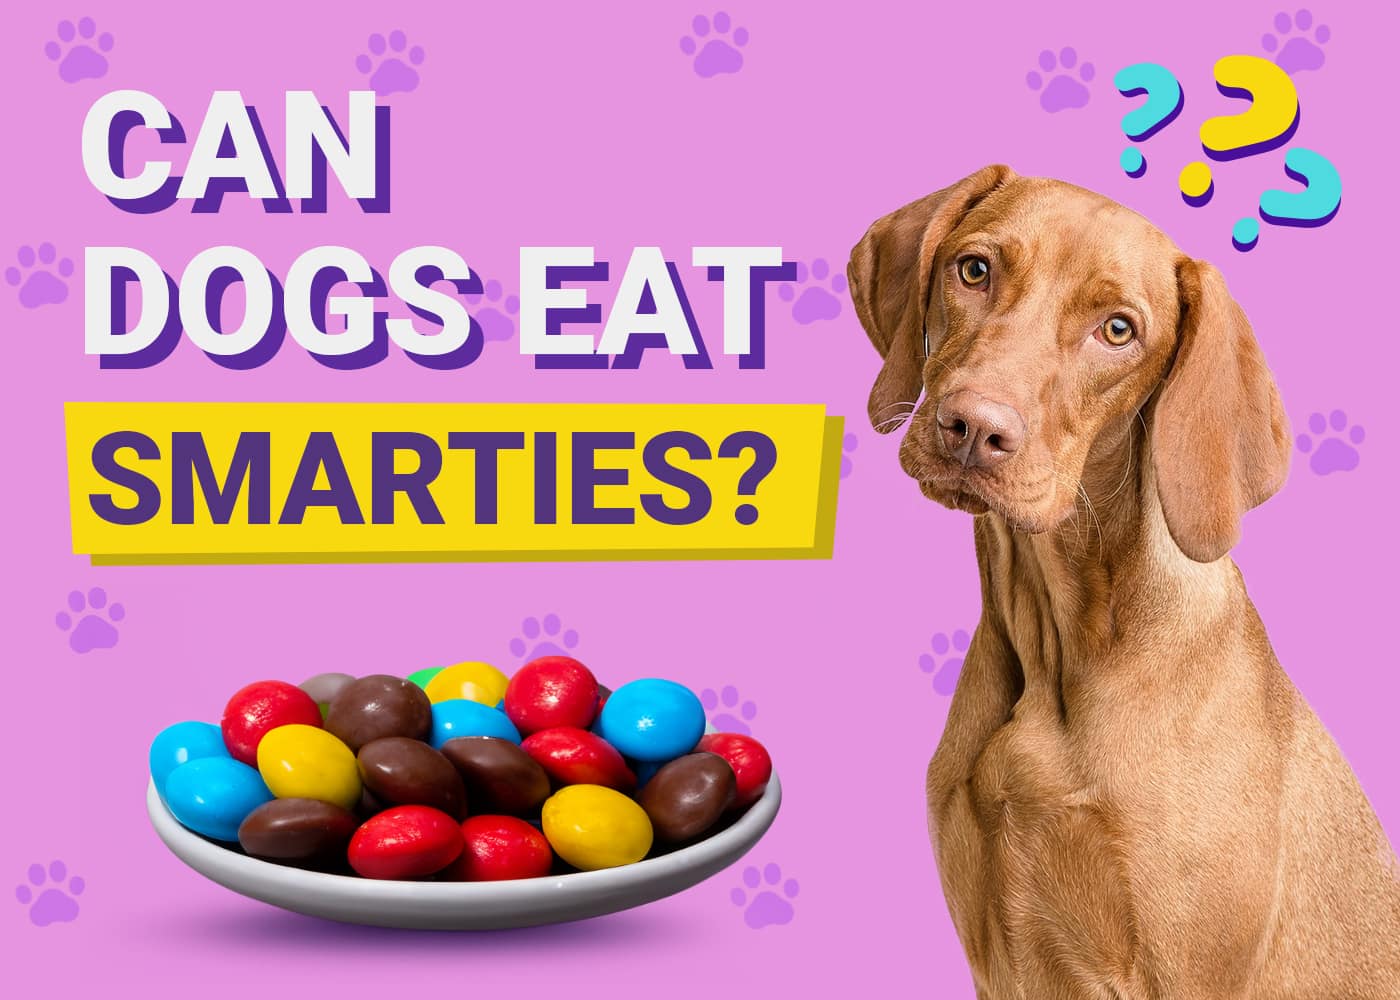 Can Dogs Eat Smarties